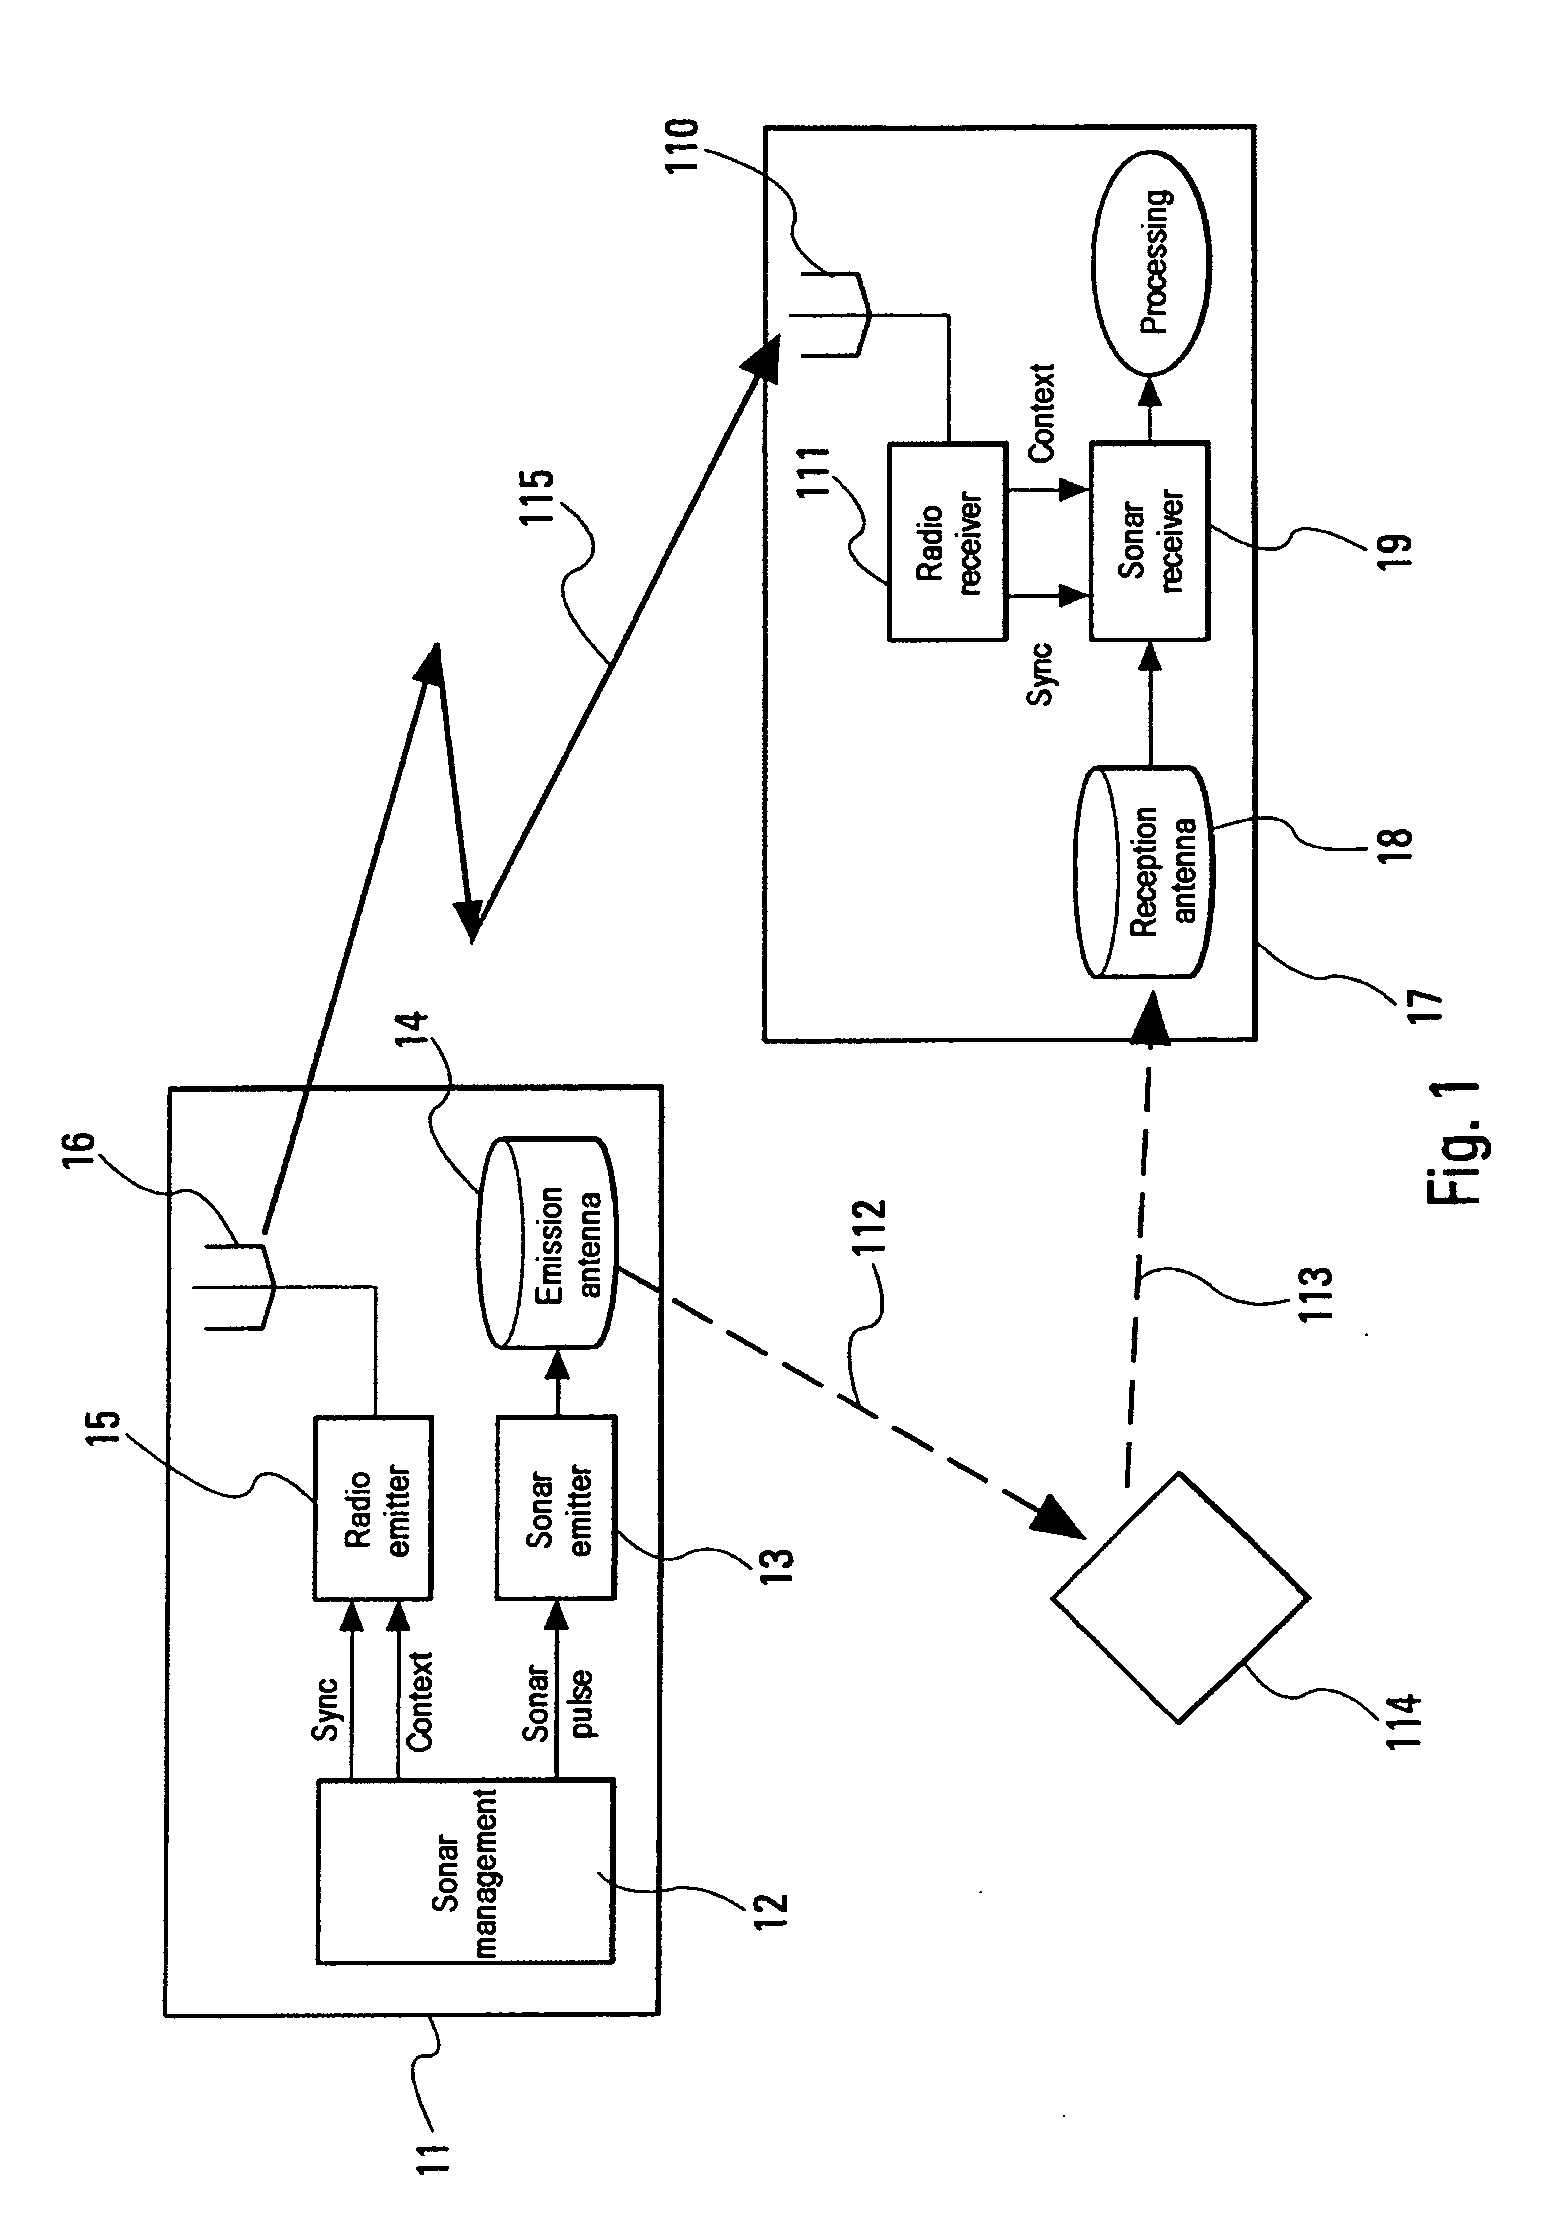 Architecture of an acoustic multistatic system